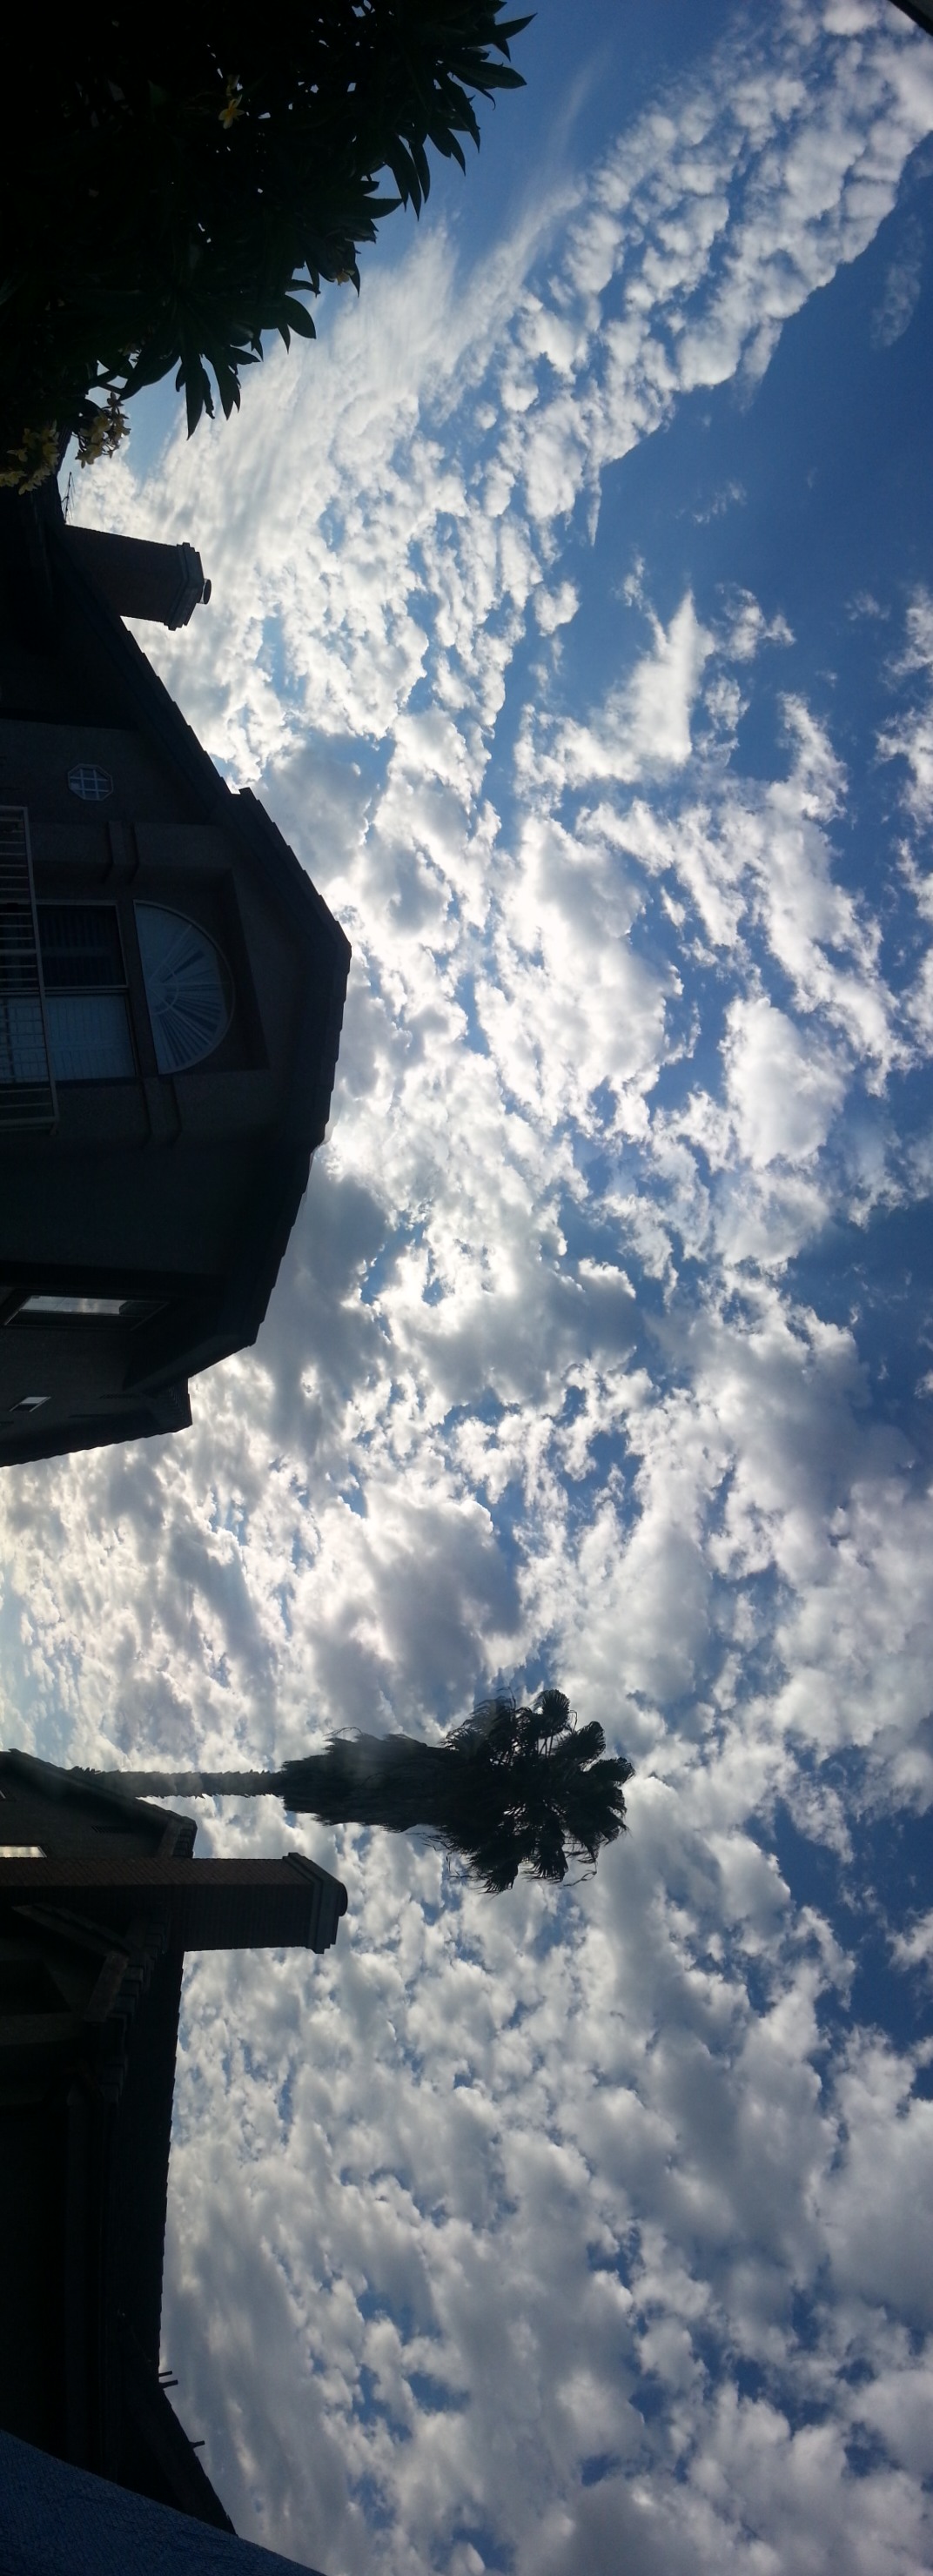 Cool Clouds Over My House In So. California!